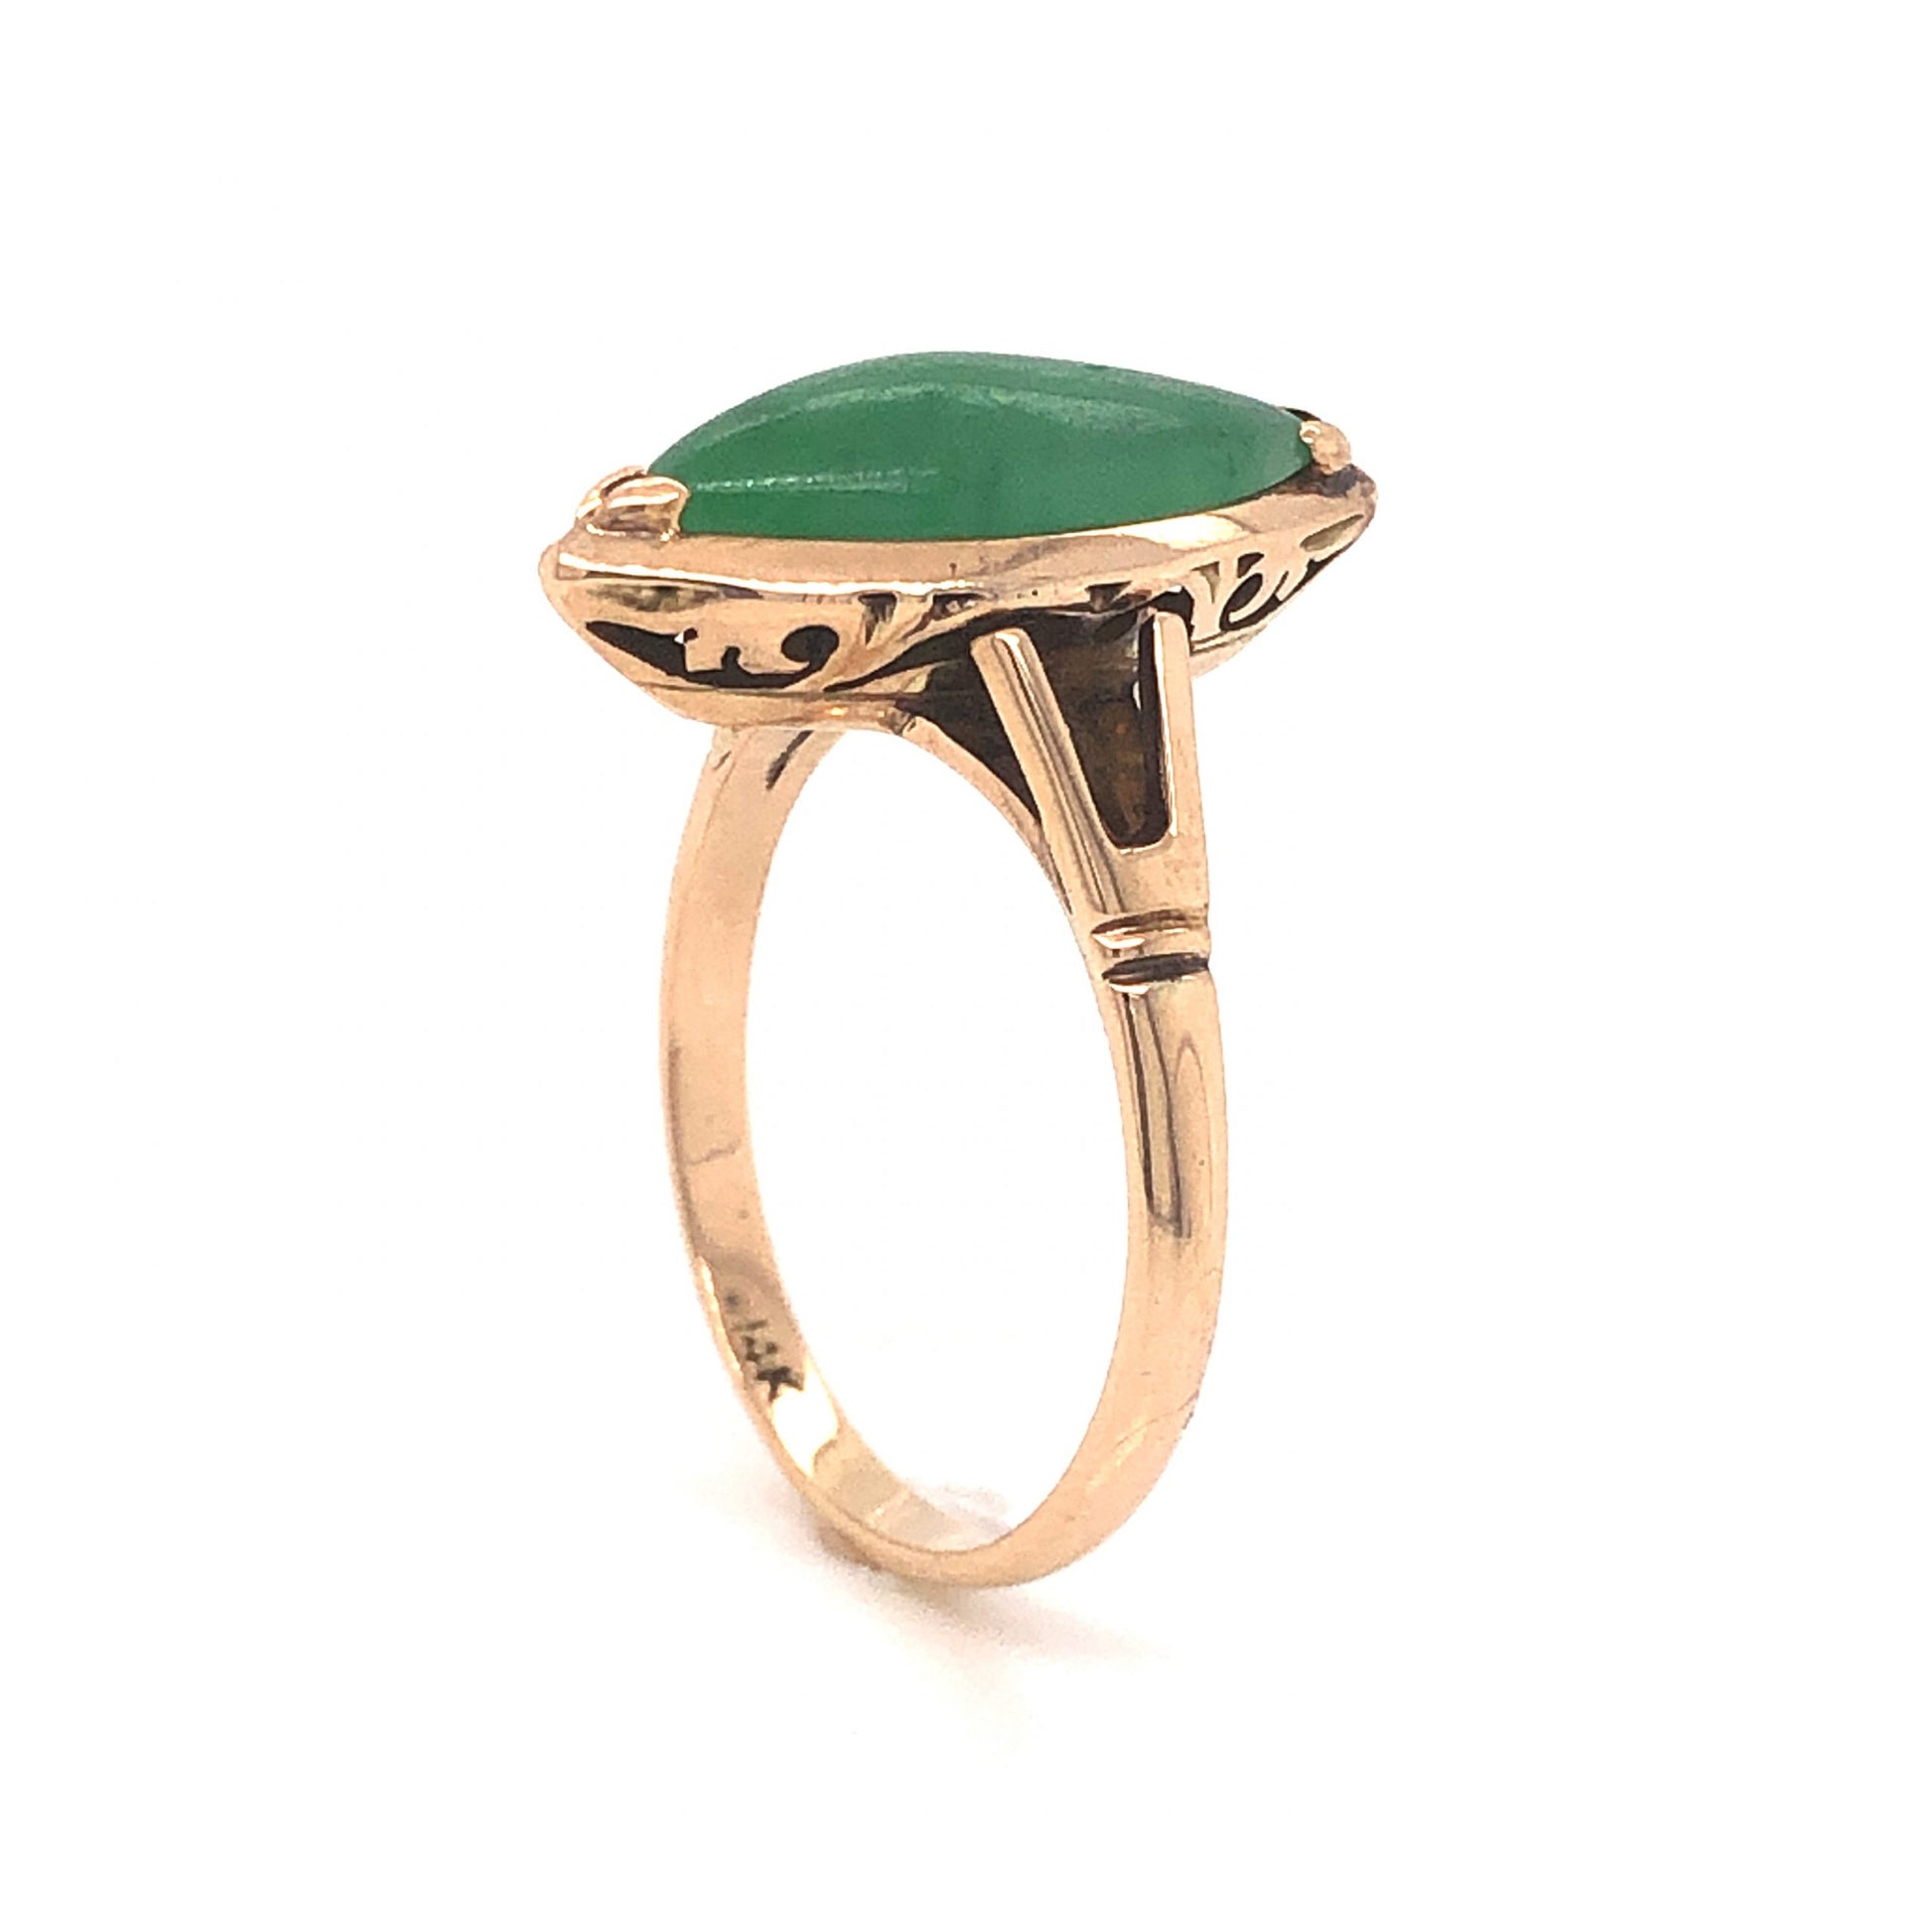 Mid-Century Marquise Shaped Jade Ring in 14k Yellow GoldComposition: 14 Karat Yellow Gold Ring Size: 7 Total Gram Weight: 3.3 g Inscription: 14k
      